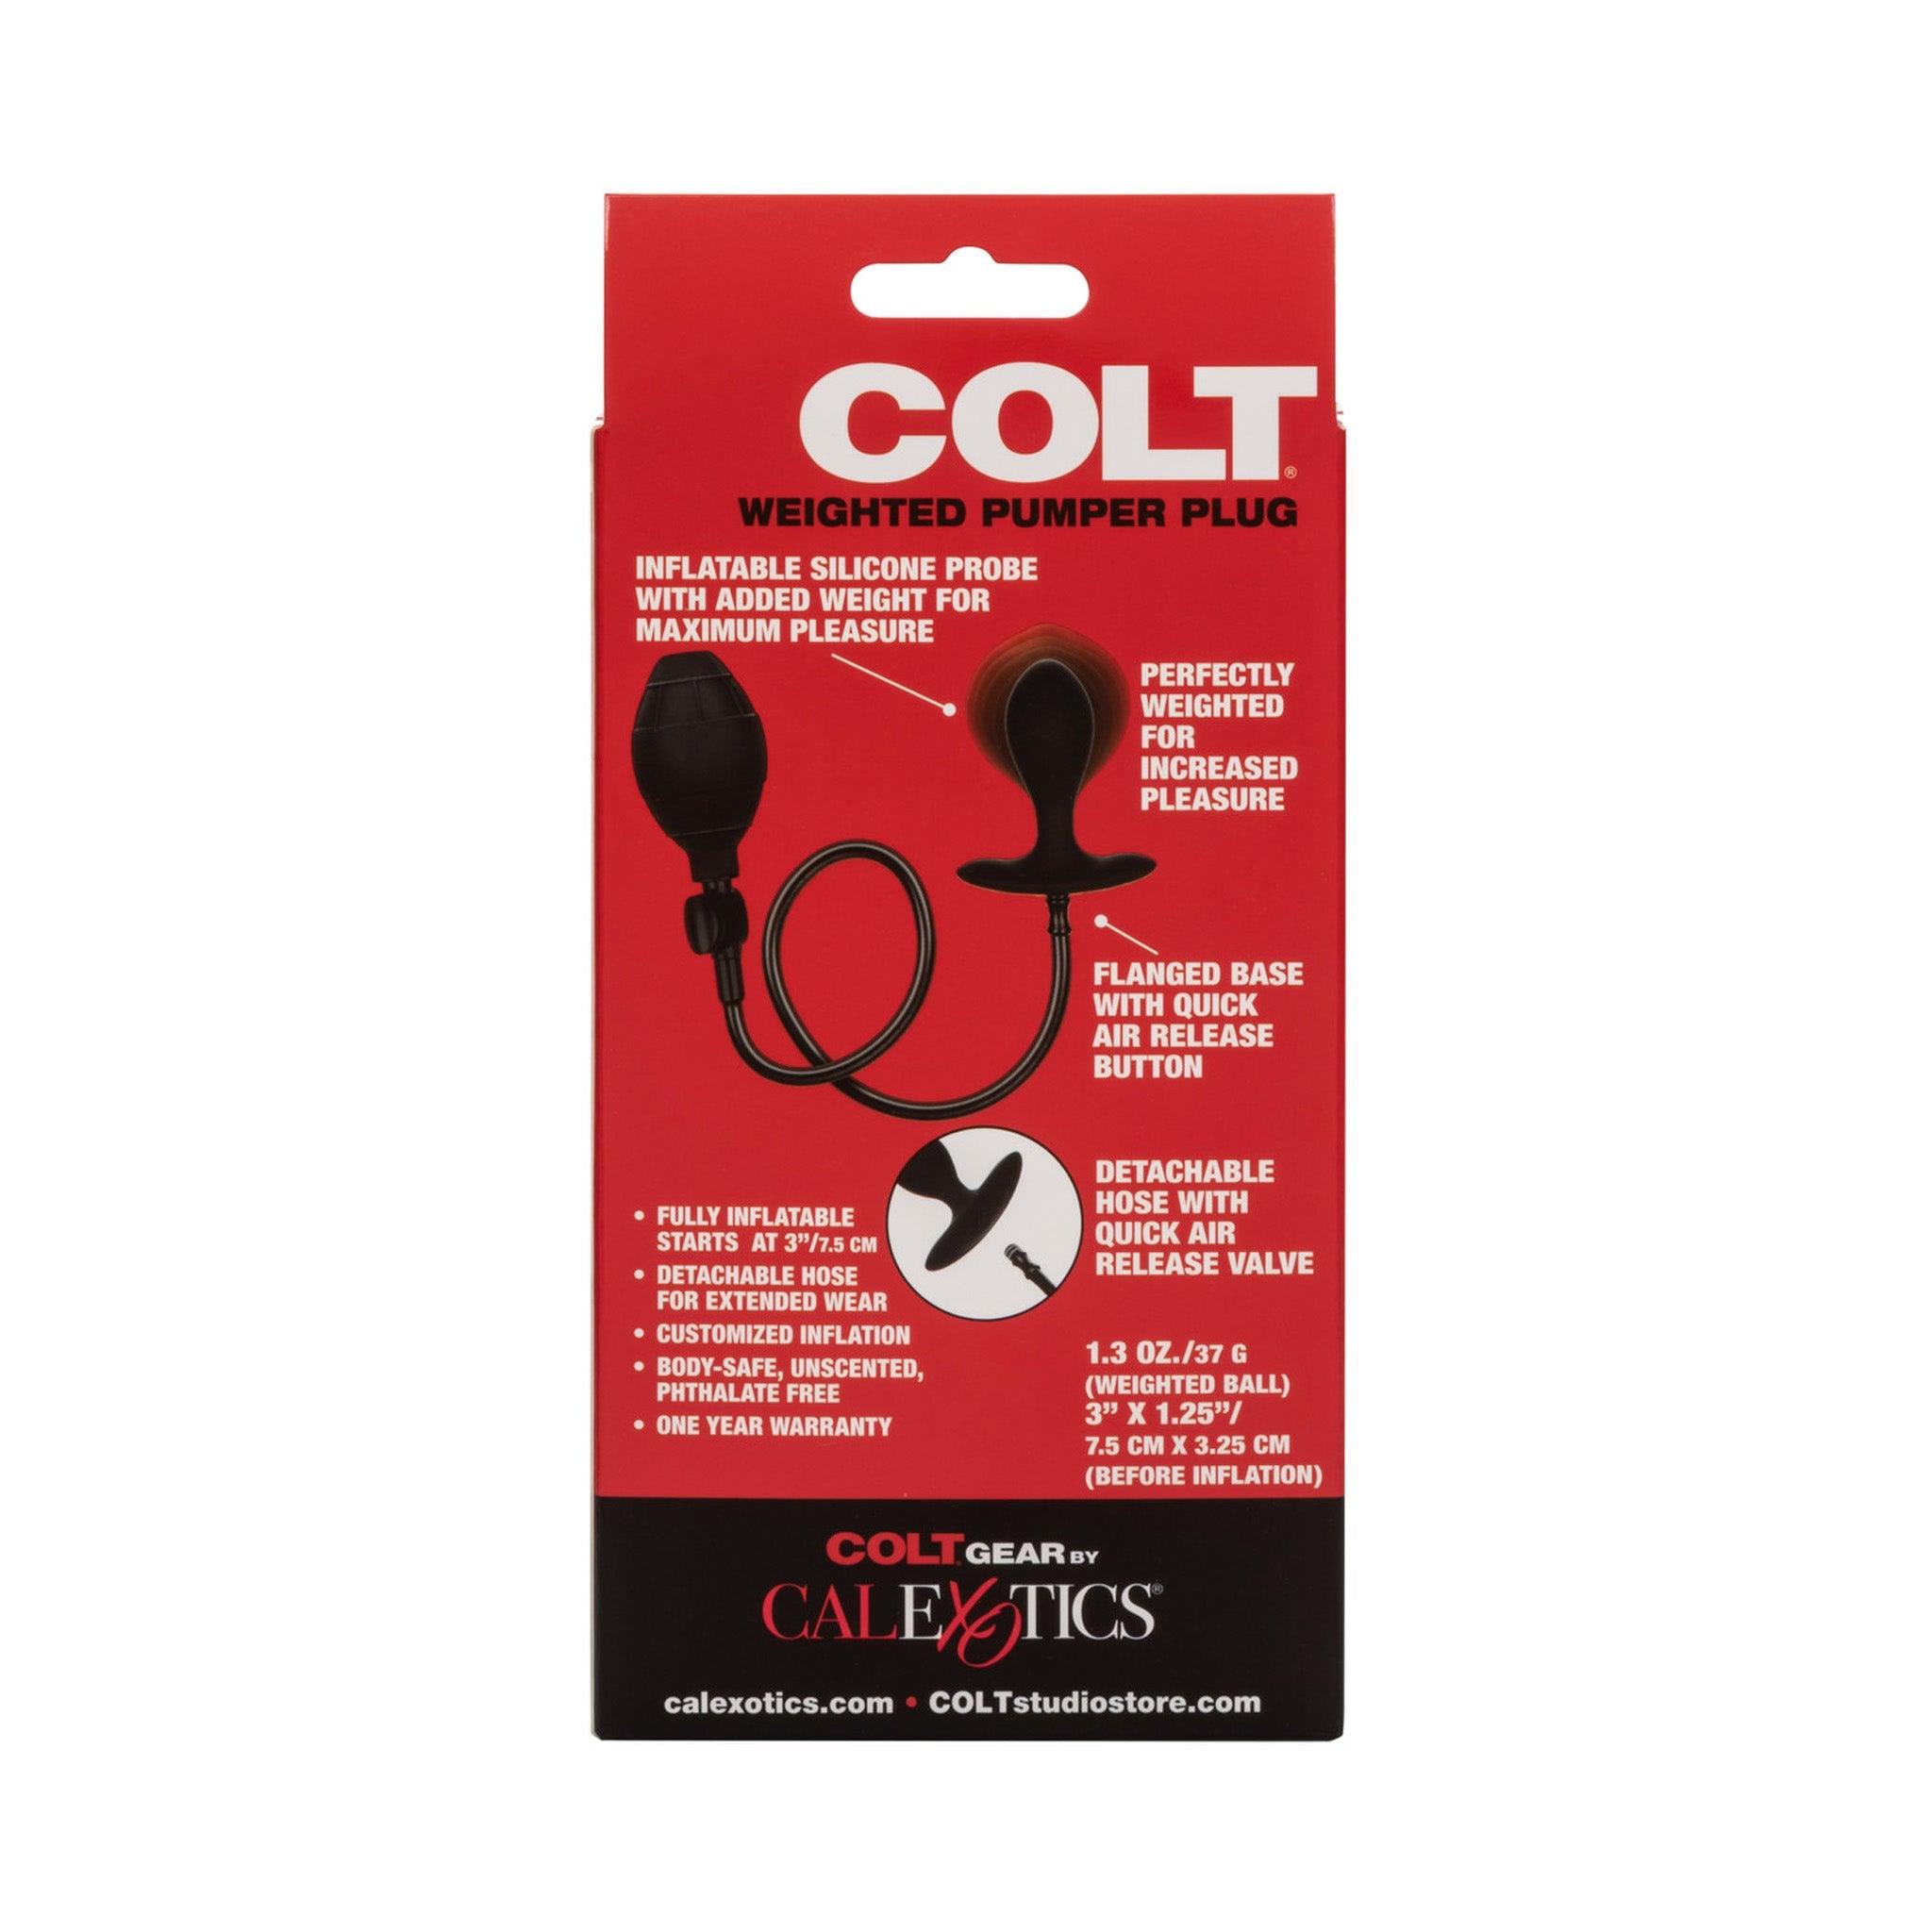 COLT Inflatable Weighted Pumper Plug - CheapLubes.com